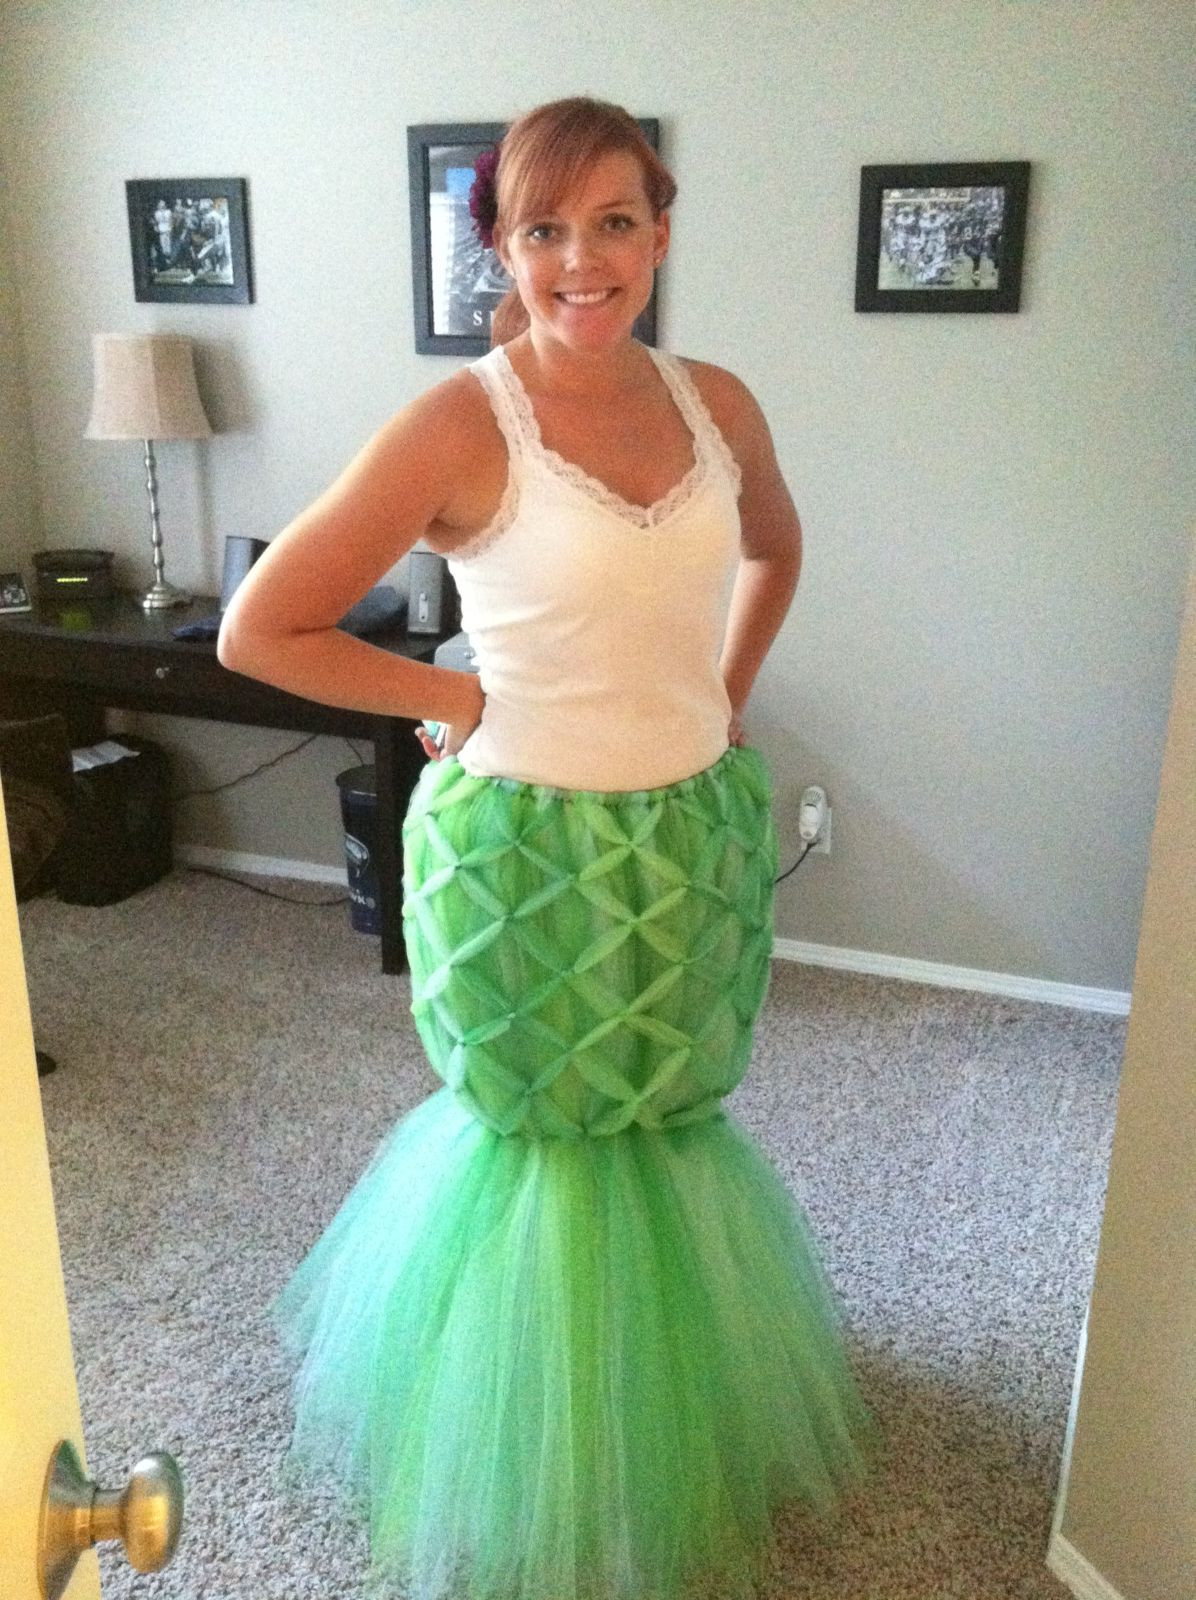 Mermaid Costume Adults DIY
 Adult Tulle Mermaid costume Carson should so do this with